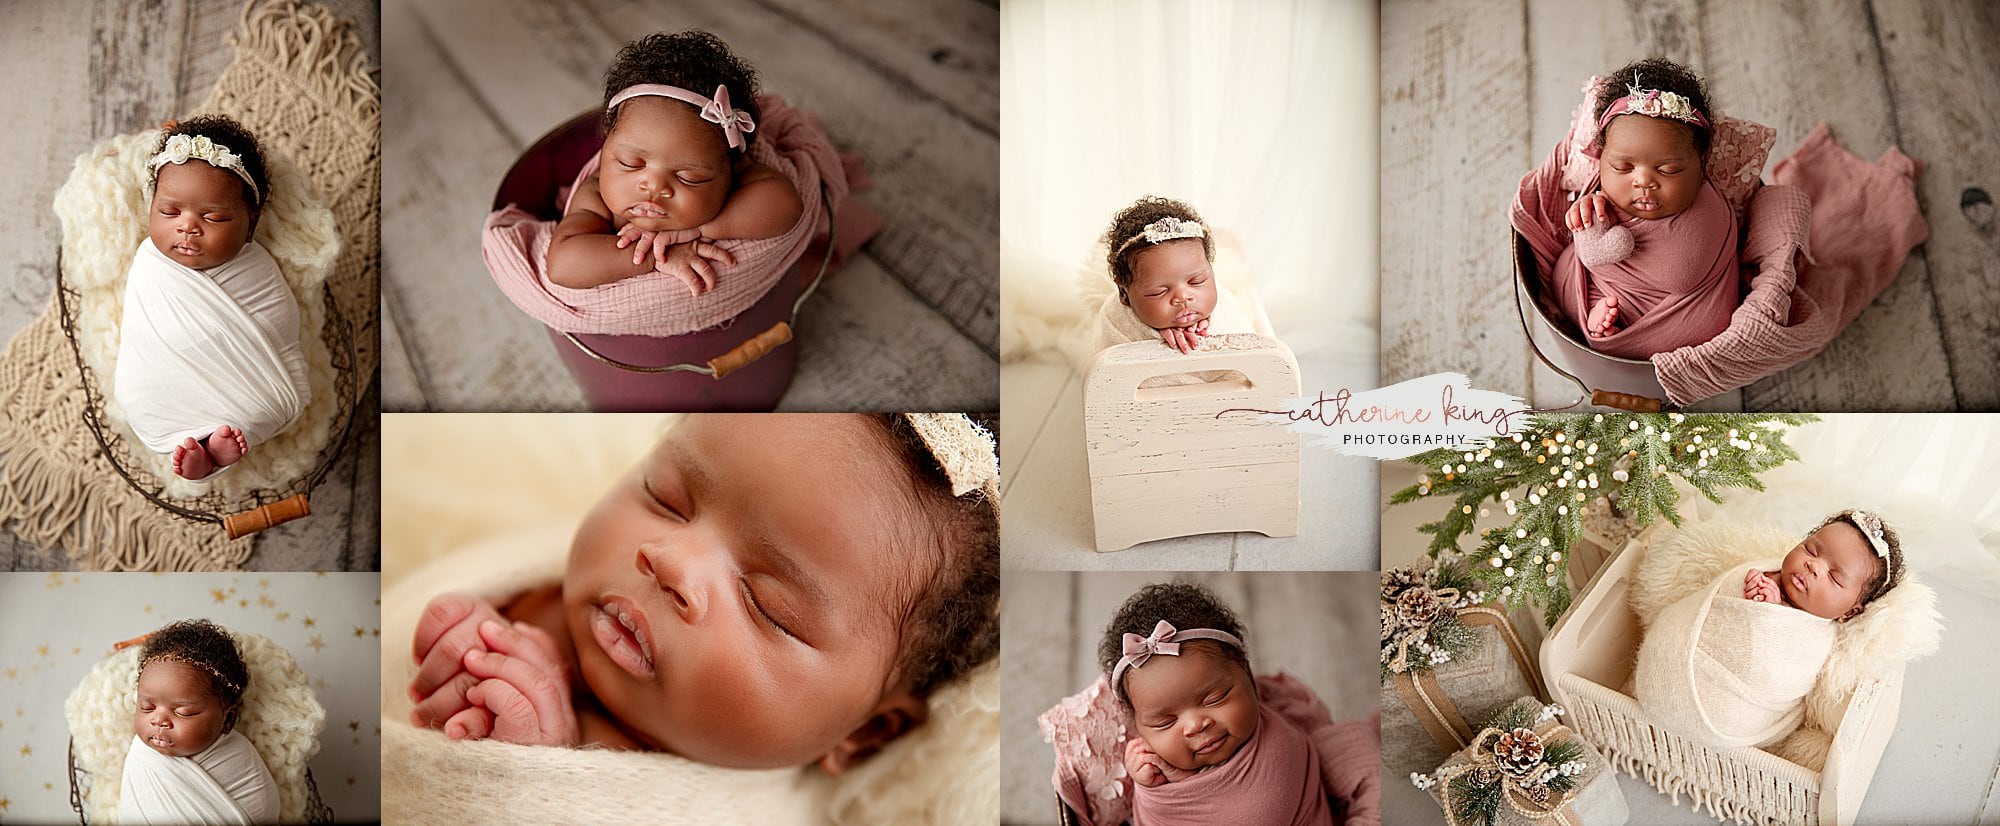 Newborn Photography feature with miss Aniah, Manchester CT